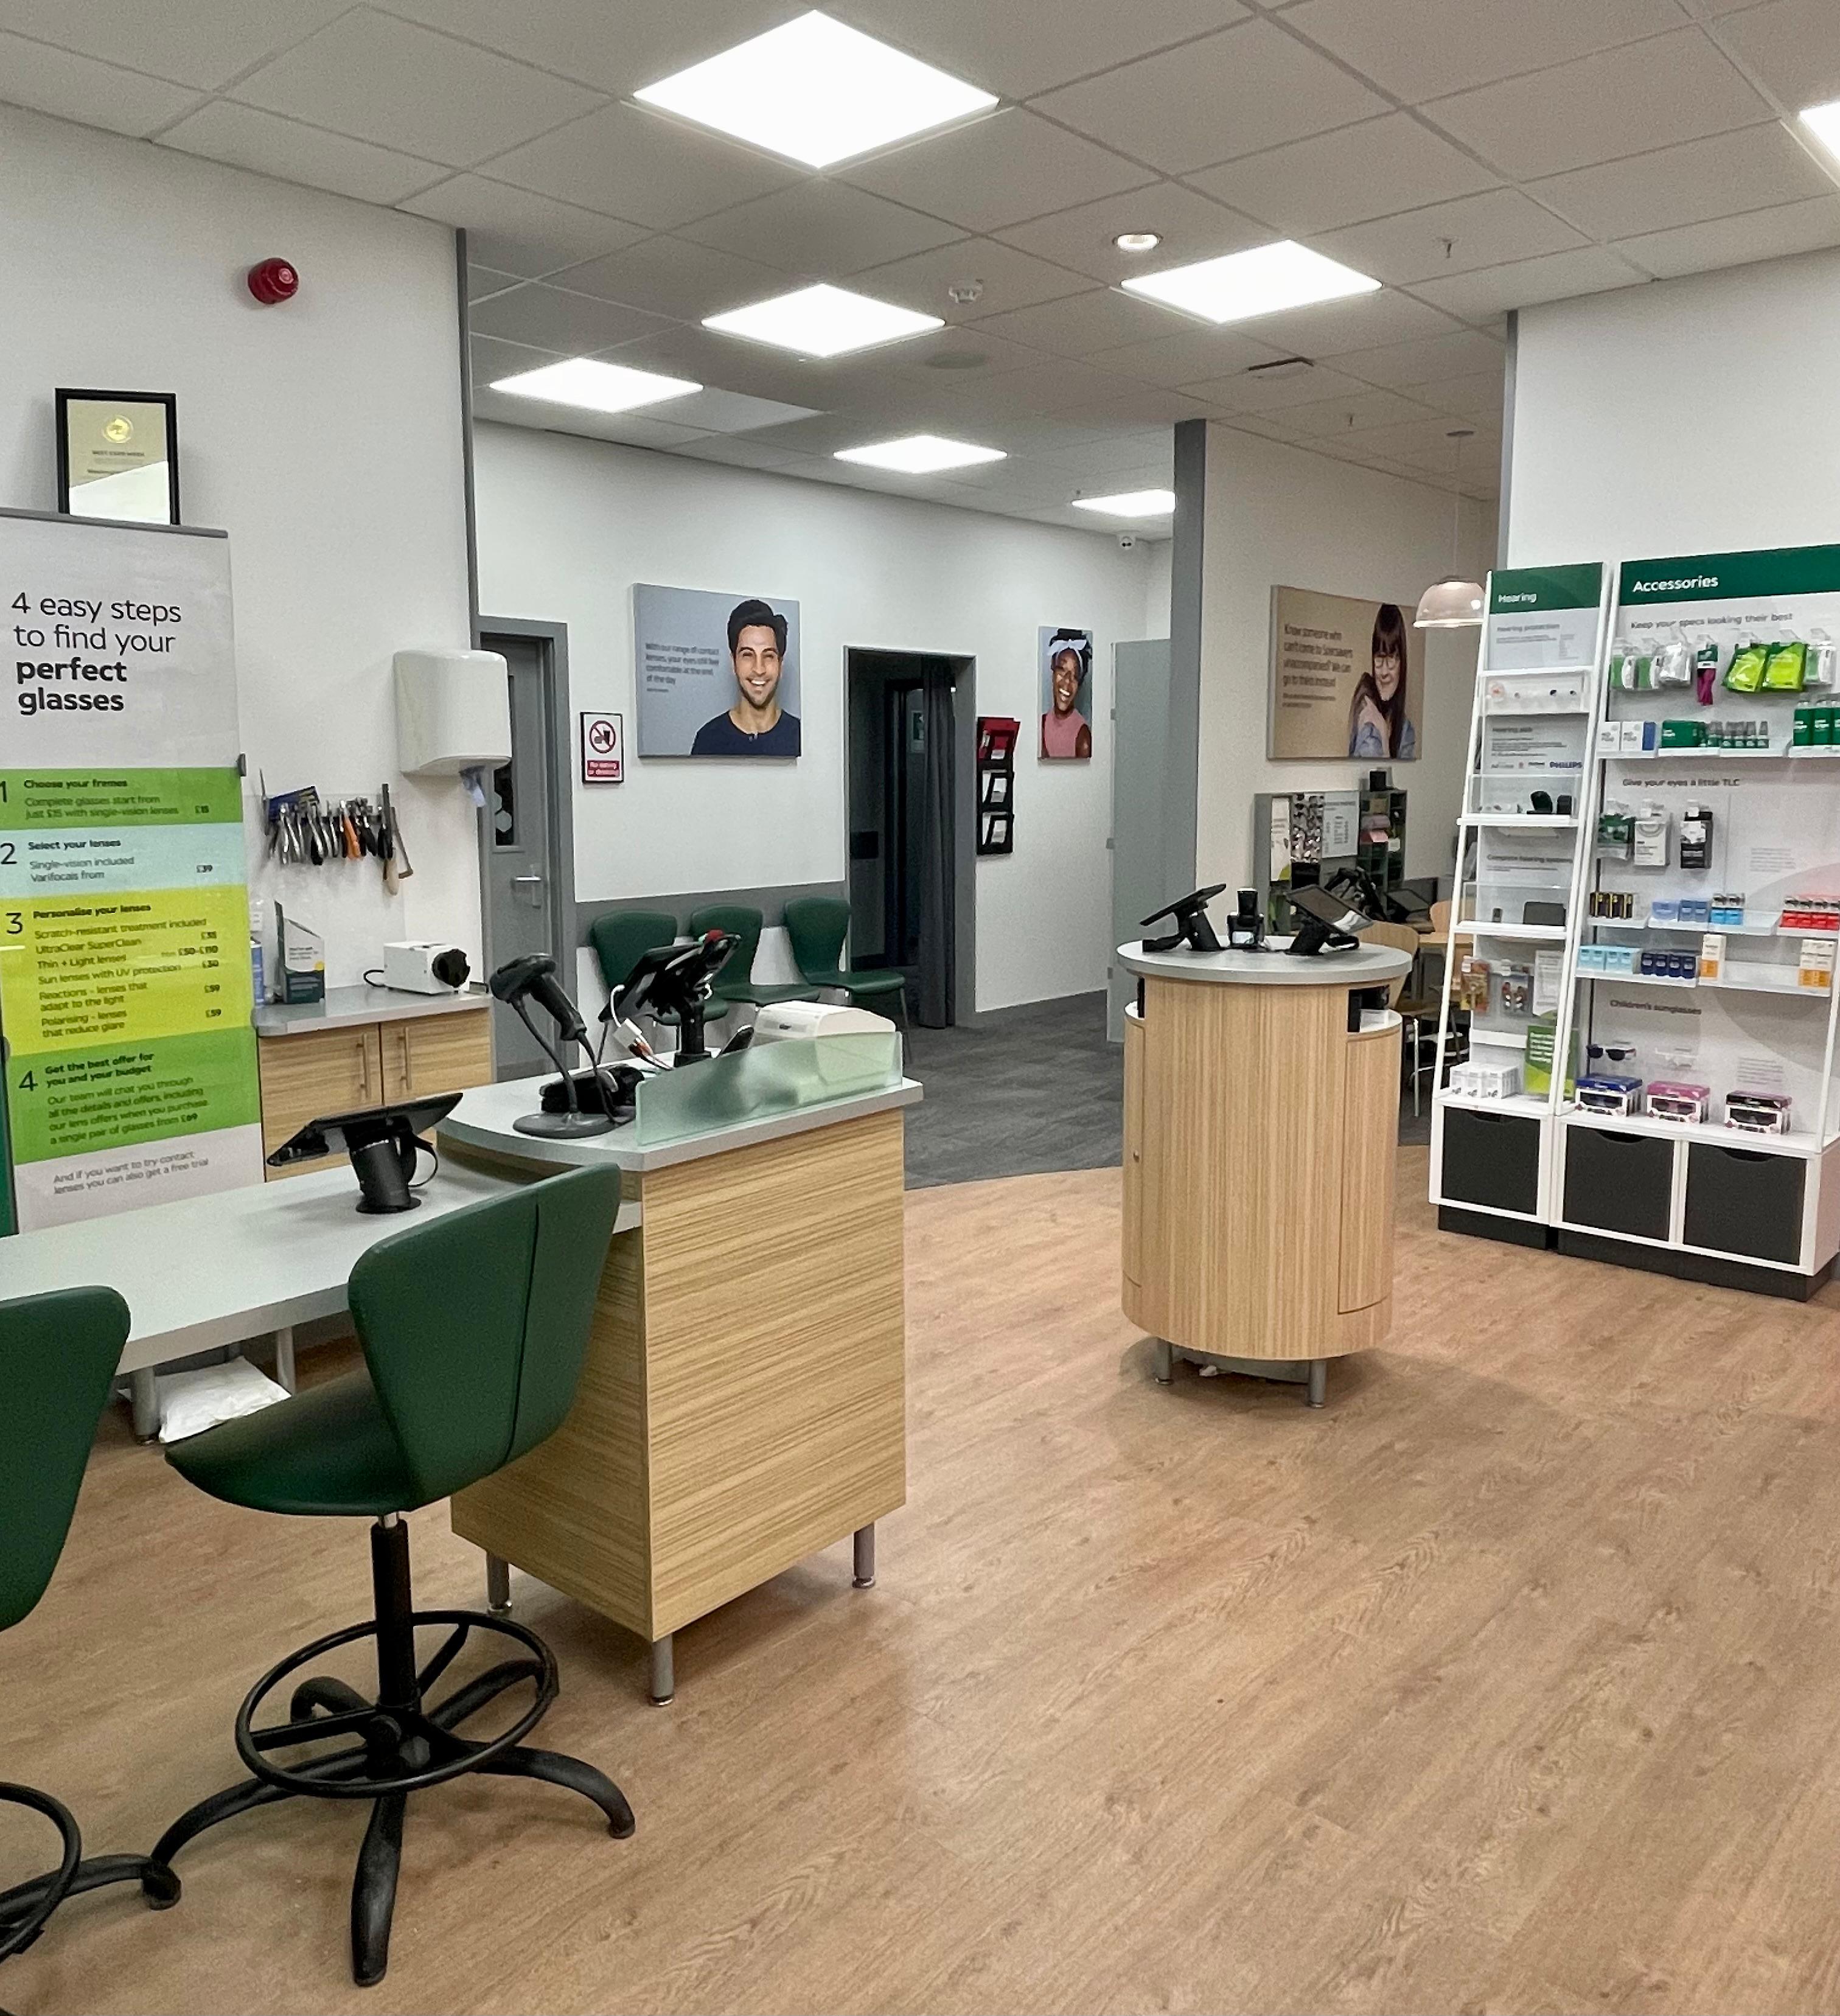 Specsavers Opticians and Audiologists - Washington Sainsbury's Specsavers Opticians and Audiologists - Washington Sainsbury's Washington 01914 195460